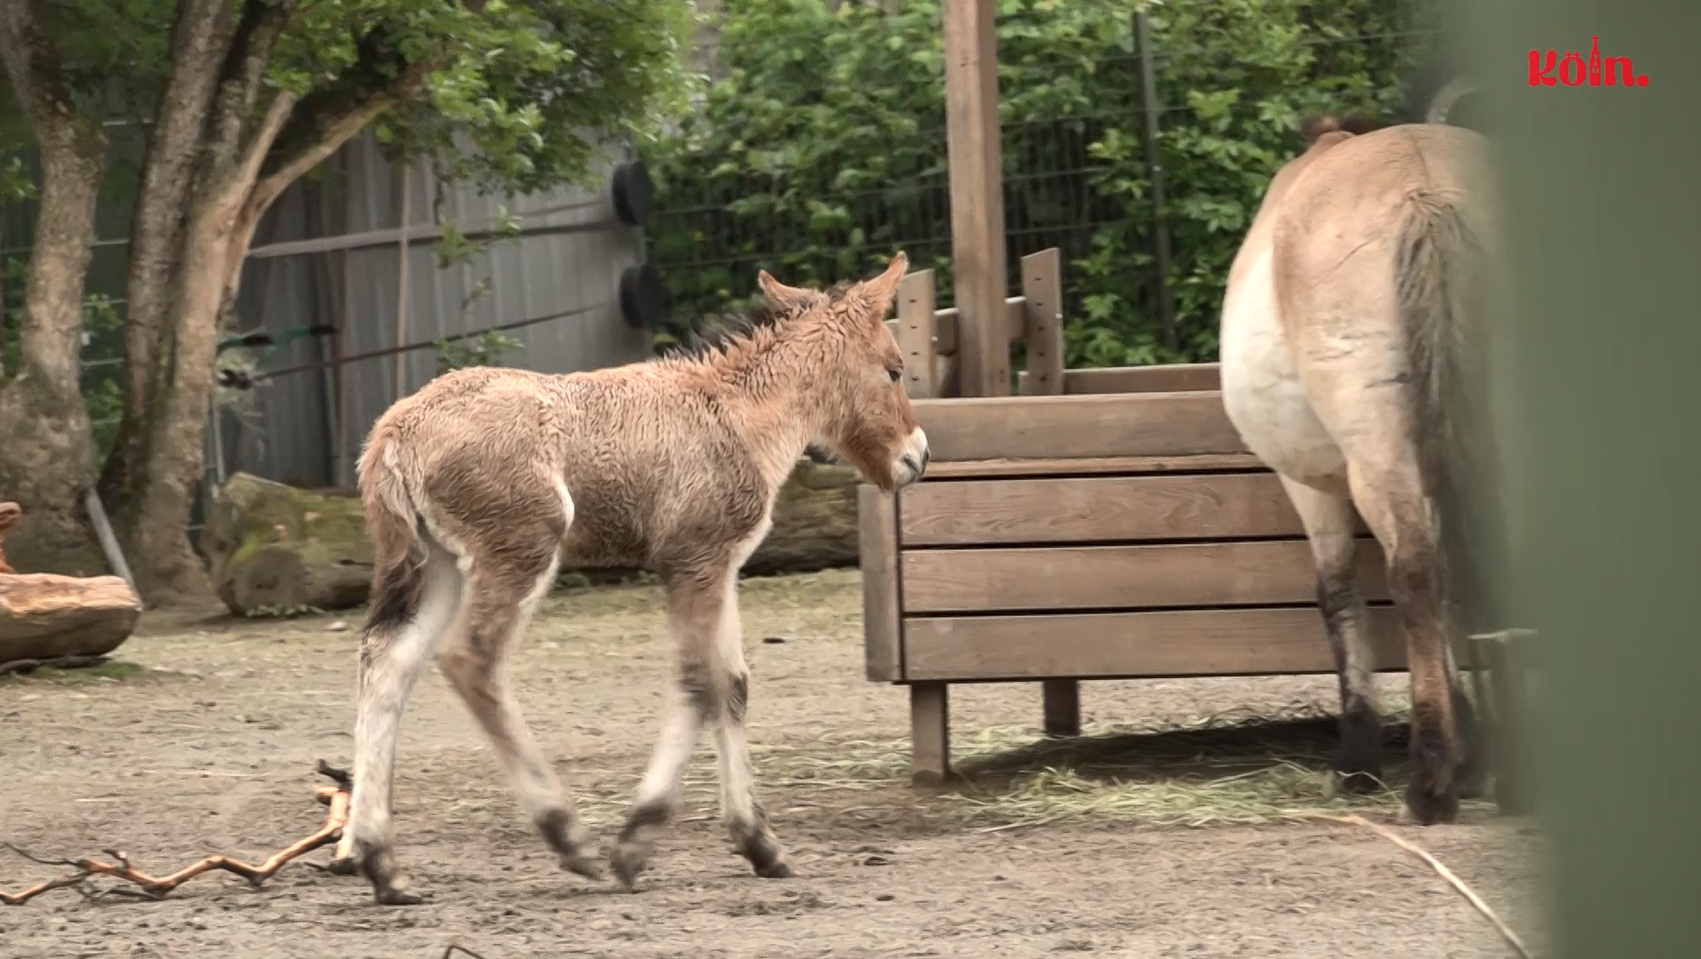 Foal Victor discovers his enclosure at Cologne Zoo